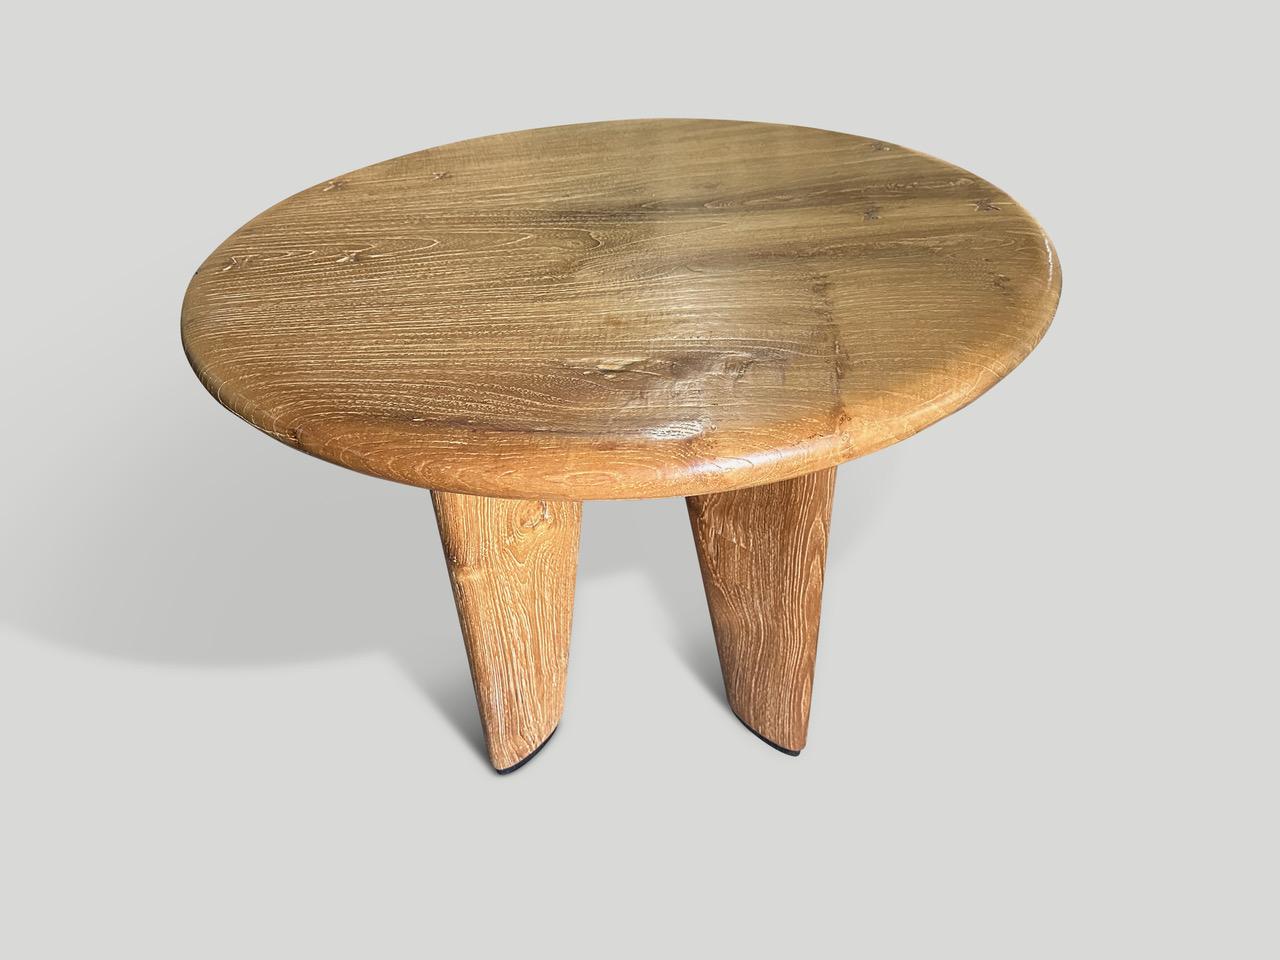 An impressive century old single slab of teak wood taken from my finest collection, is hand carved to produce this exquisite table with a deep bevelled top. We added butterflies inlaid into the wood and four sculptural minimalist legs with a